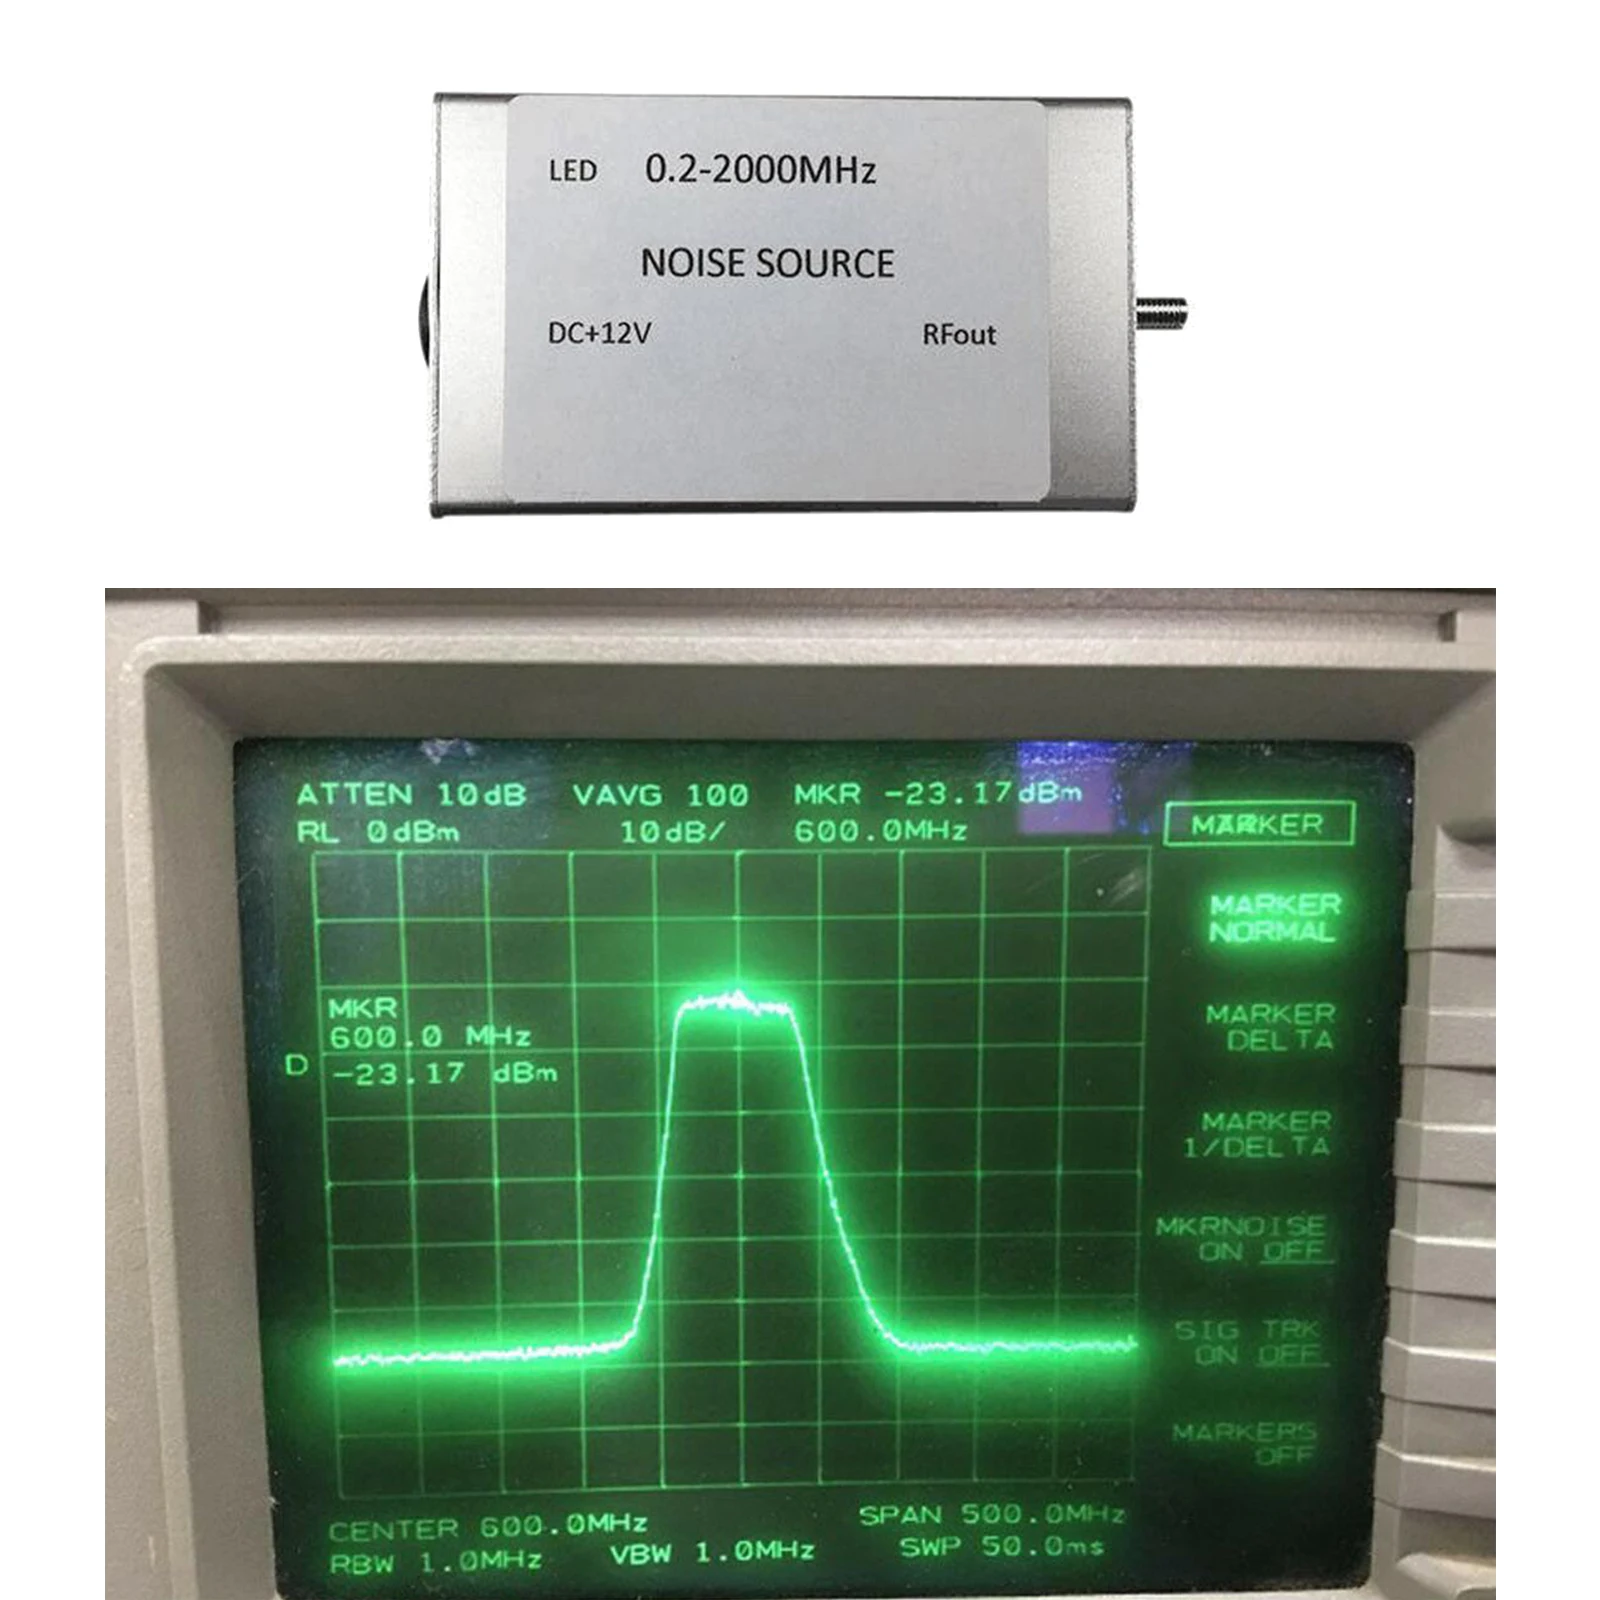 Noise Signal Generator DC+12V Simple Spectrum Tracking Source 0.2-2000M